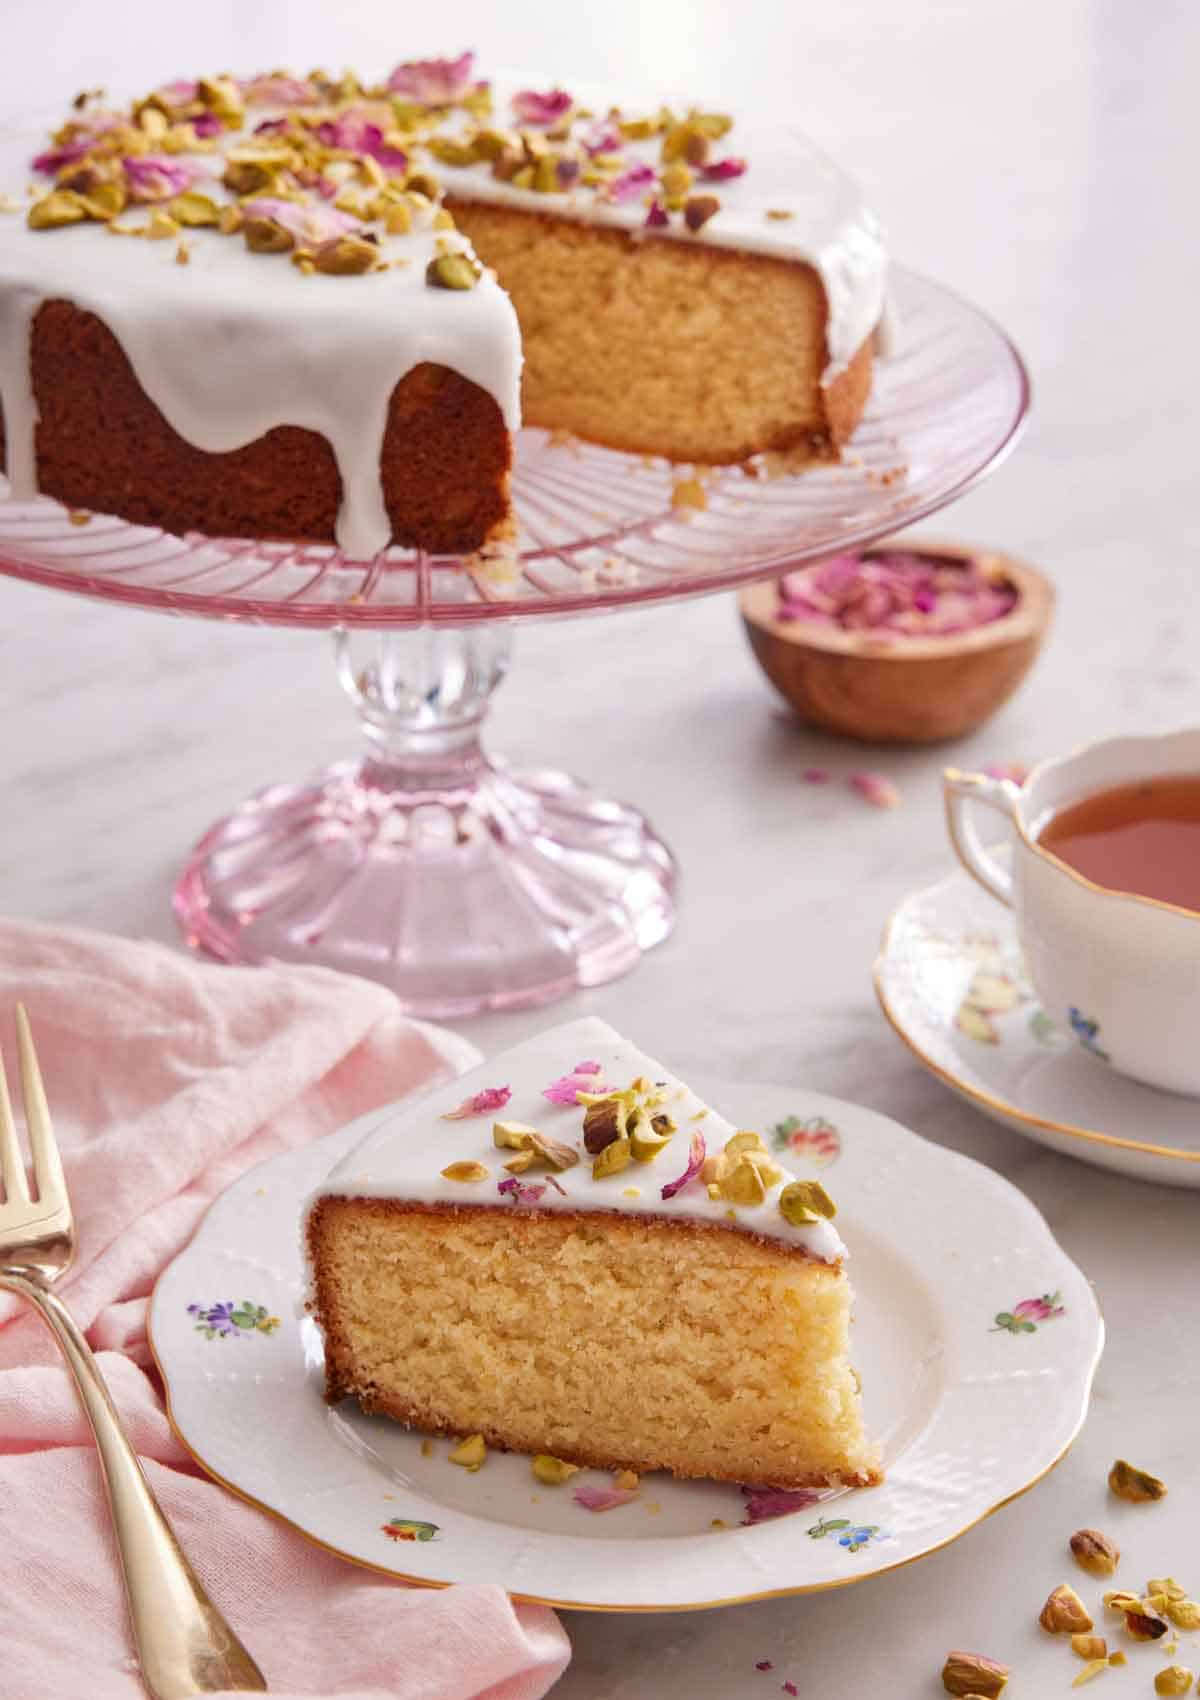 A slice of Persian love cake on a plate with a pink cake stand in the back with the rest of the cake.